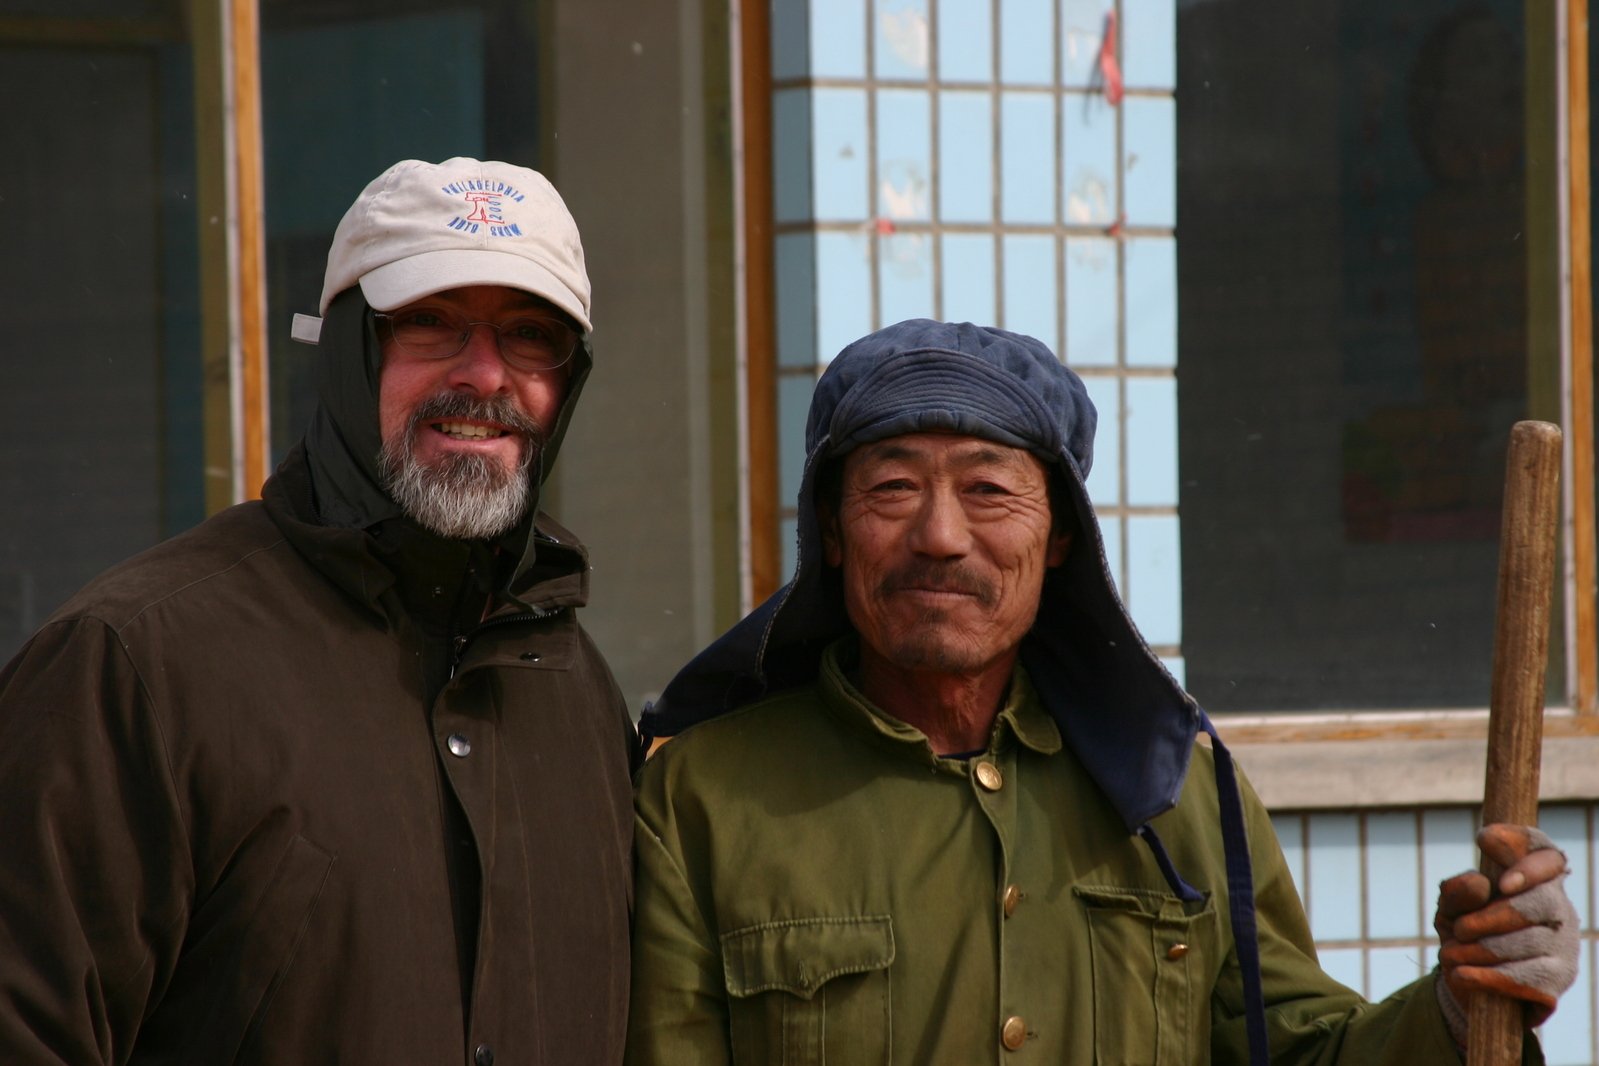 two men in winter clothes, one is holding a baseball bat